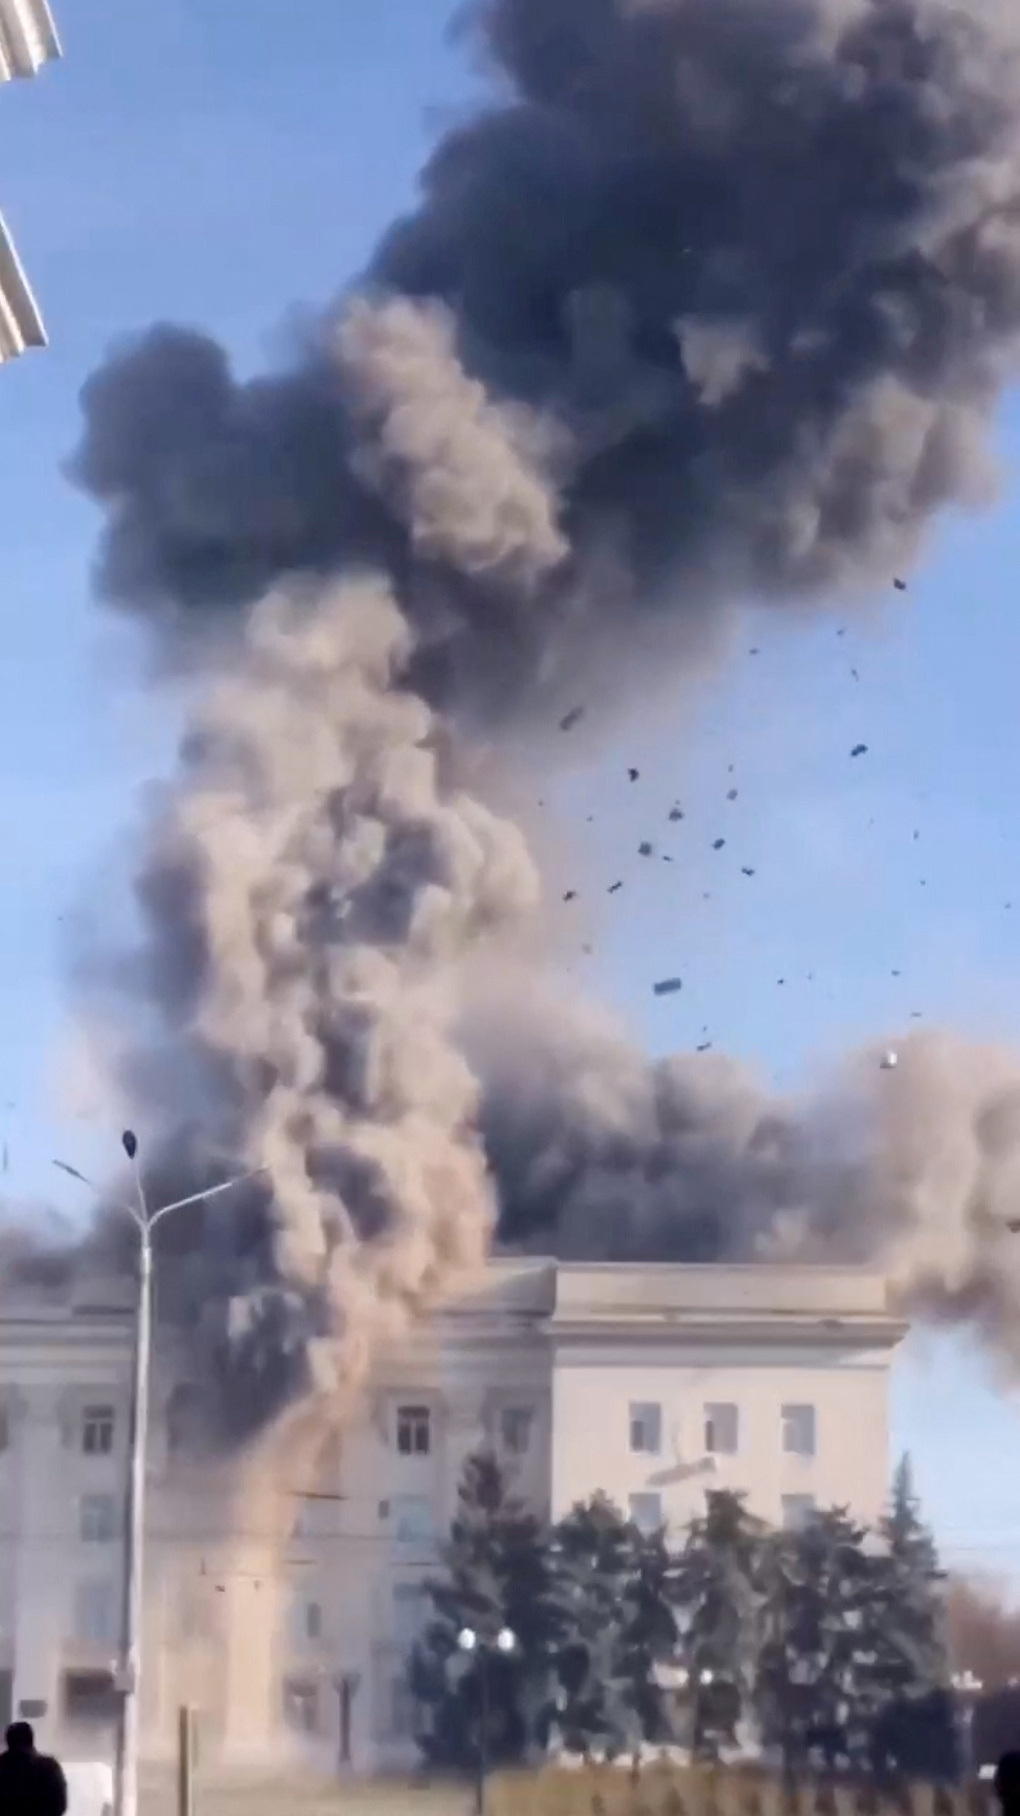 Kherson Regional State Administration building shelled by Russian forces